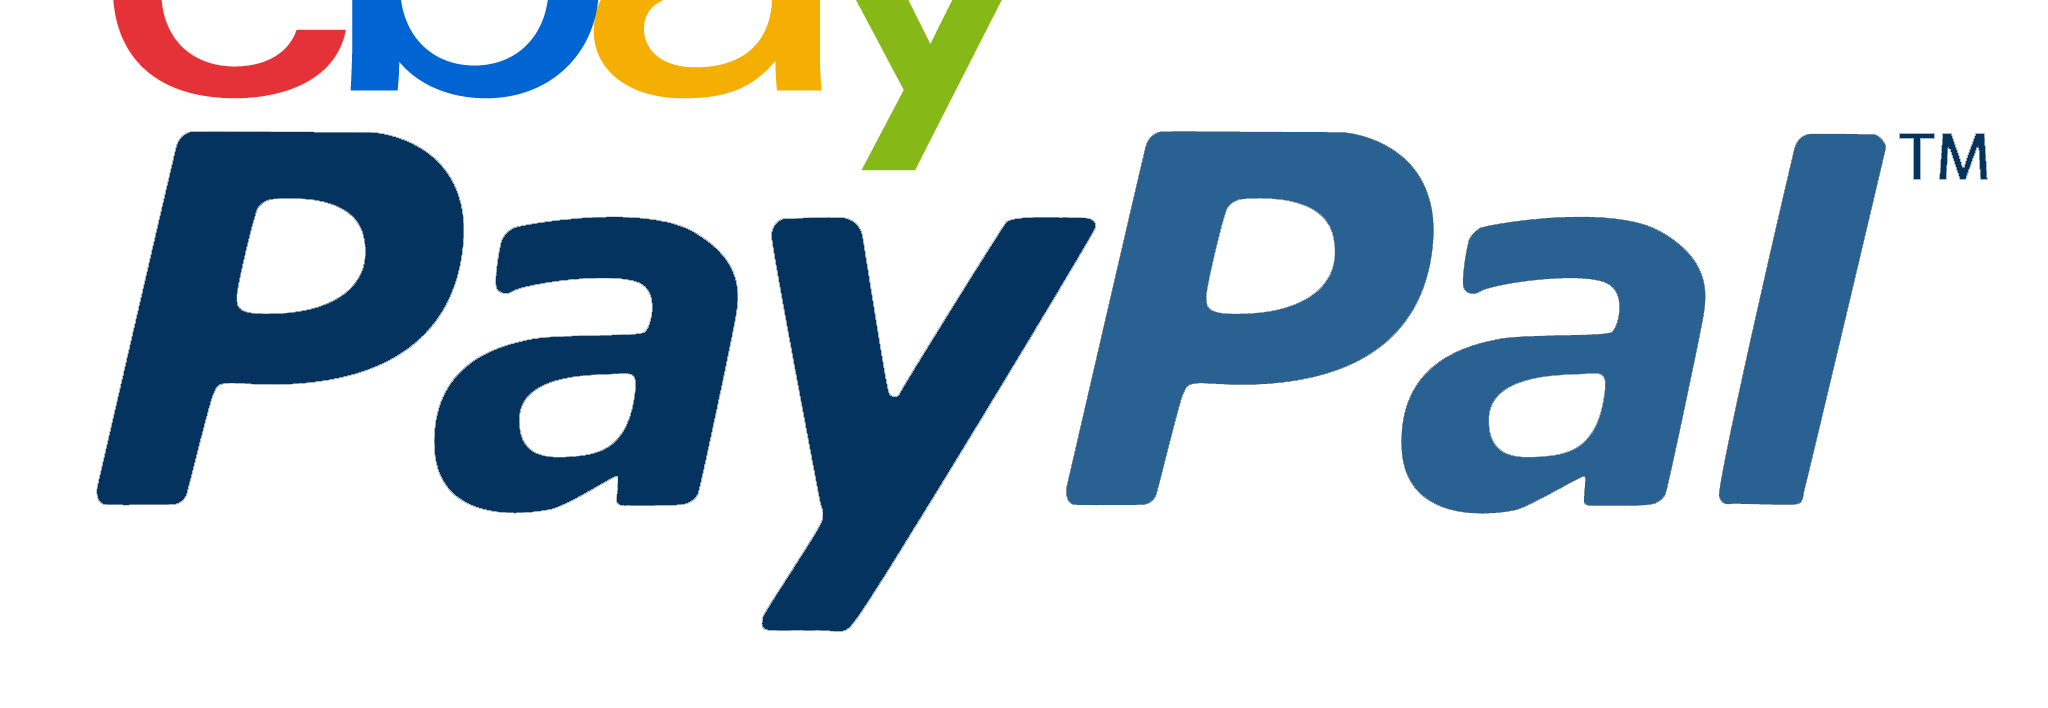 eBay To Spin Off PayPal So They Can Compete Against Each Other For Worst Company Title